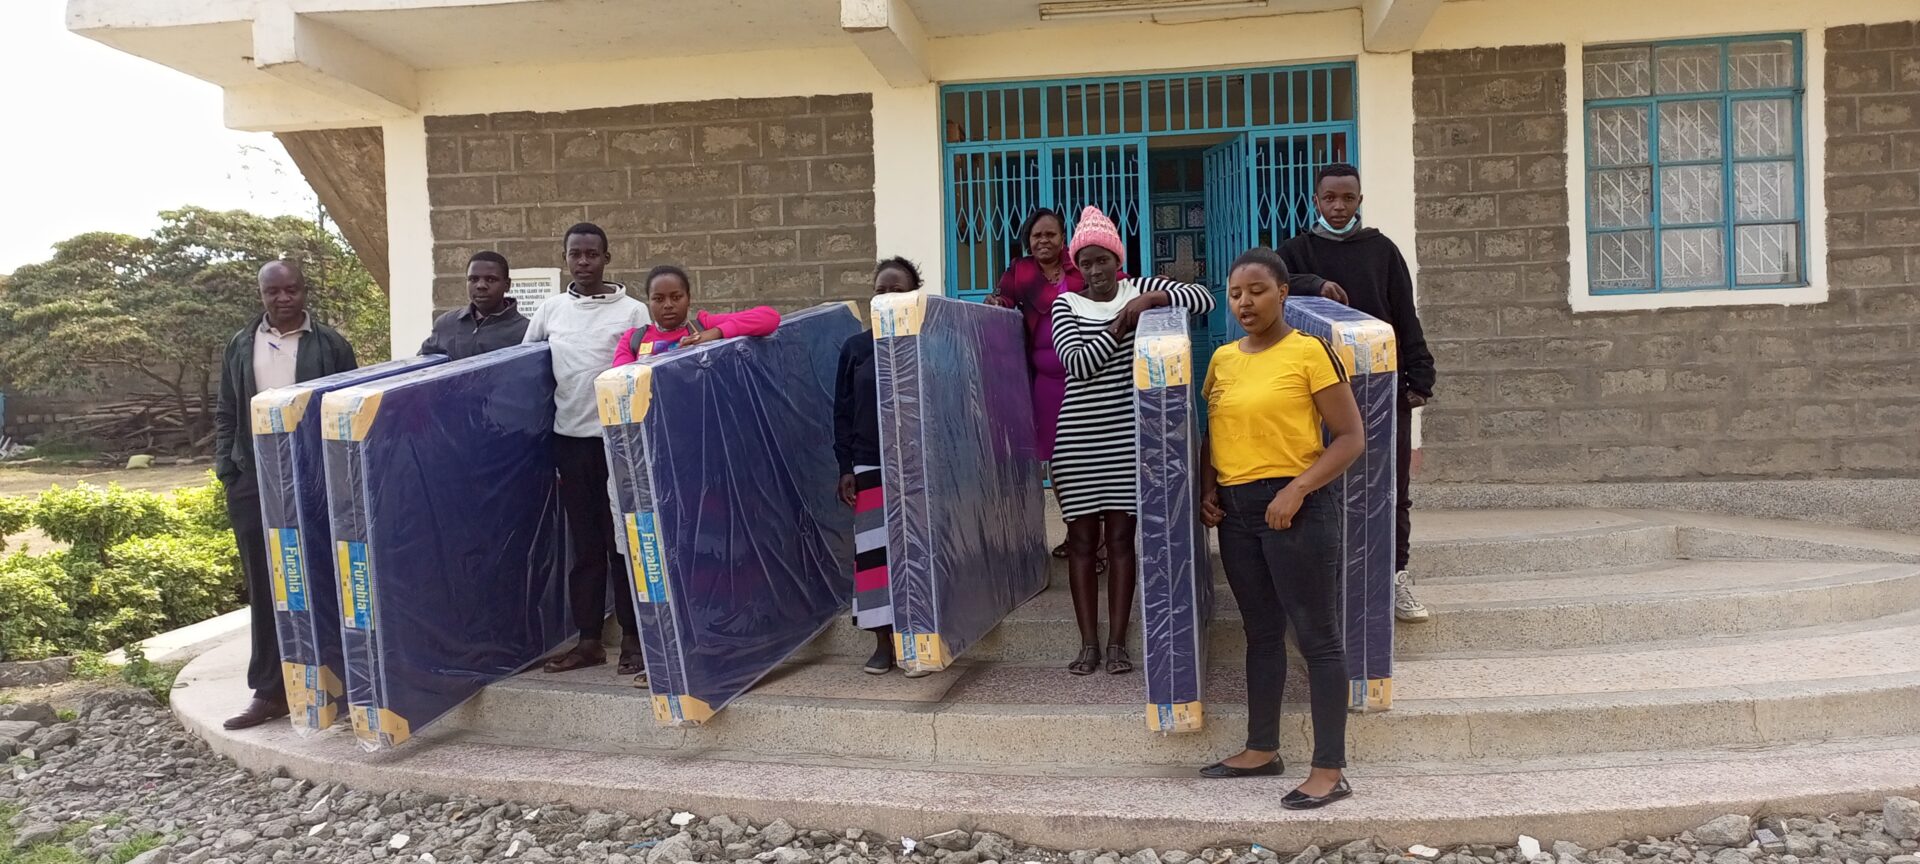 A group of people standing next to some mattresses.